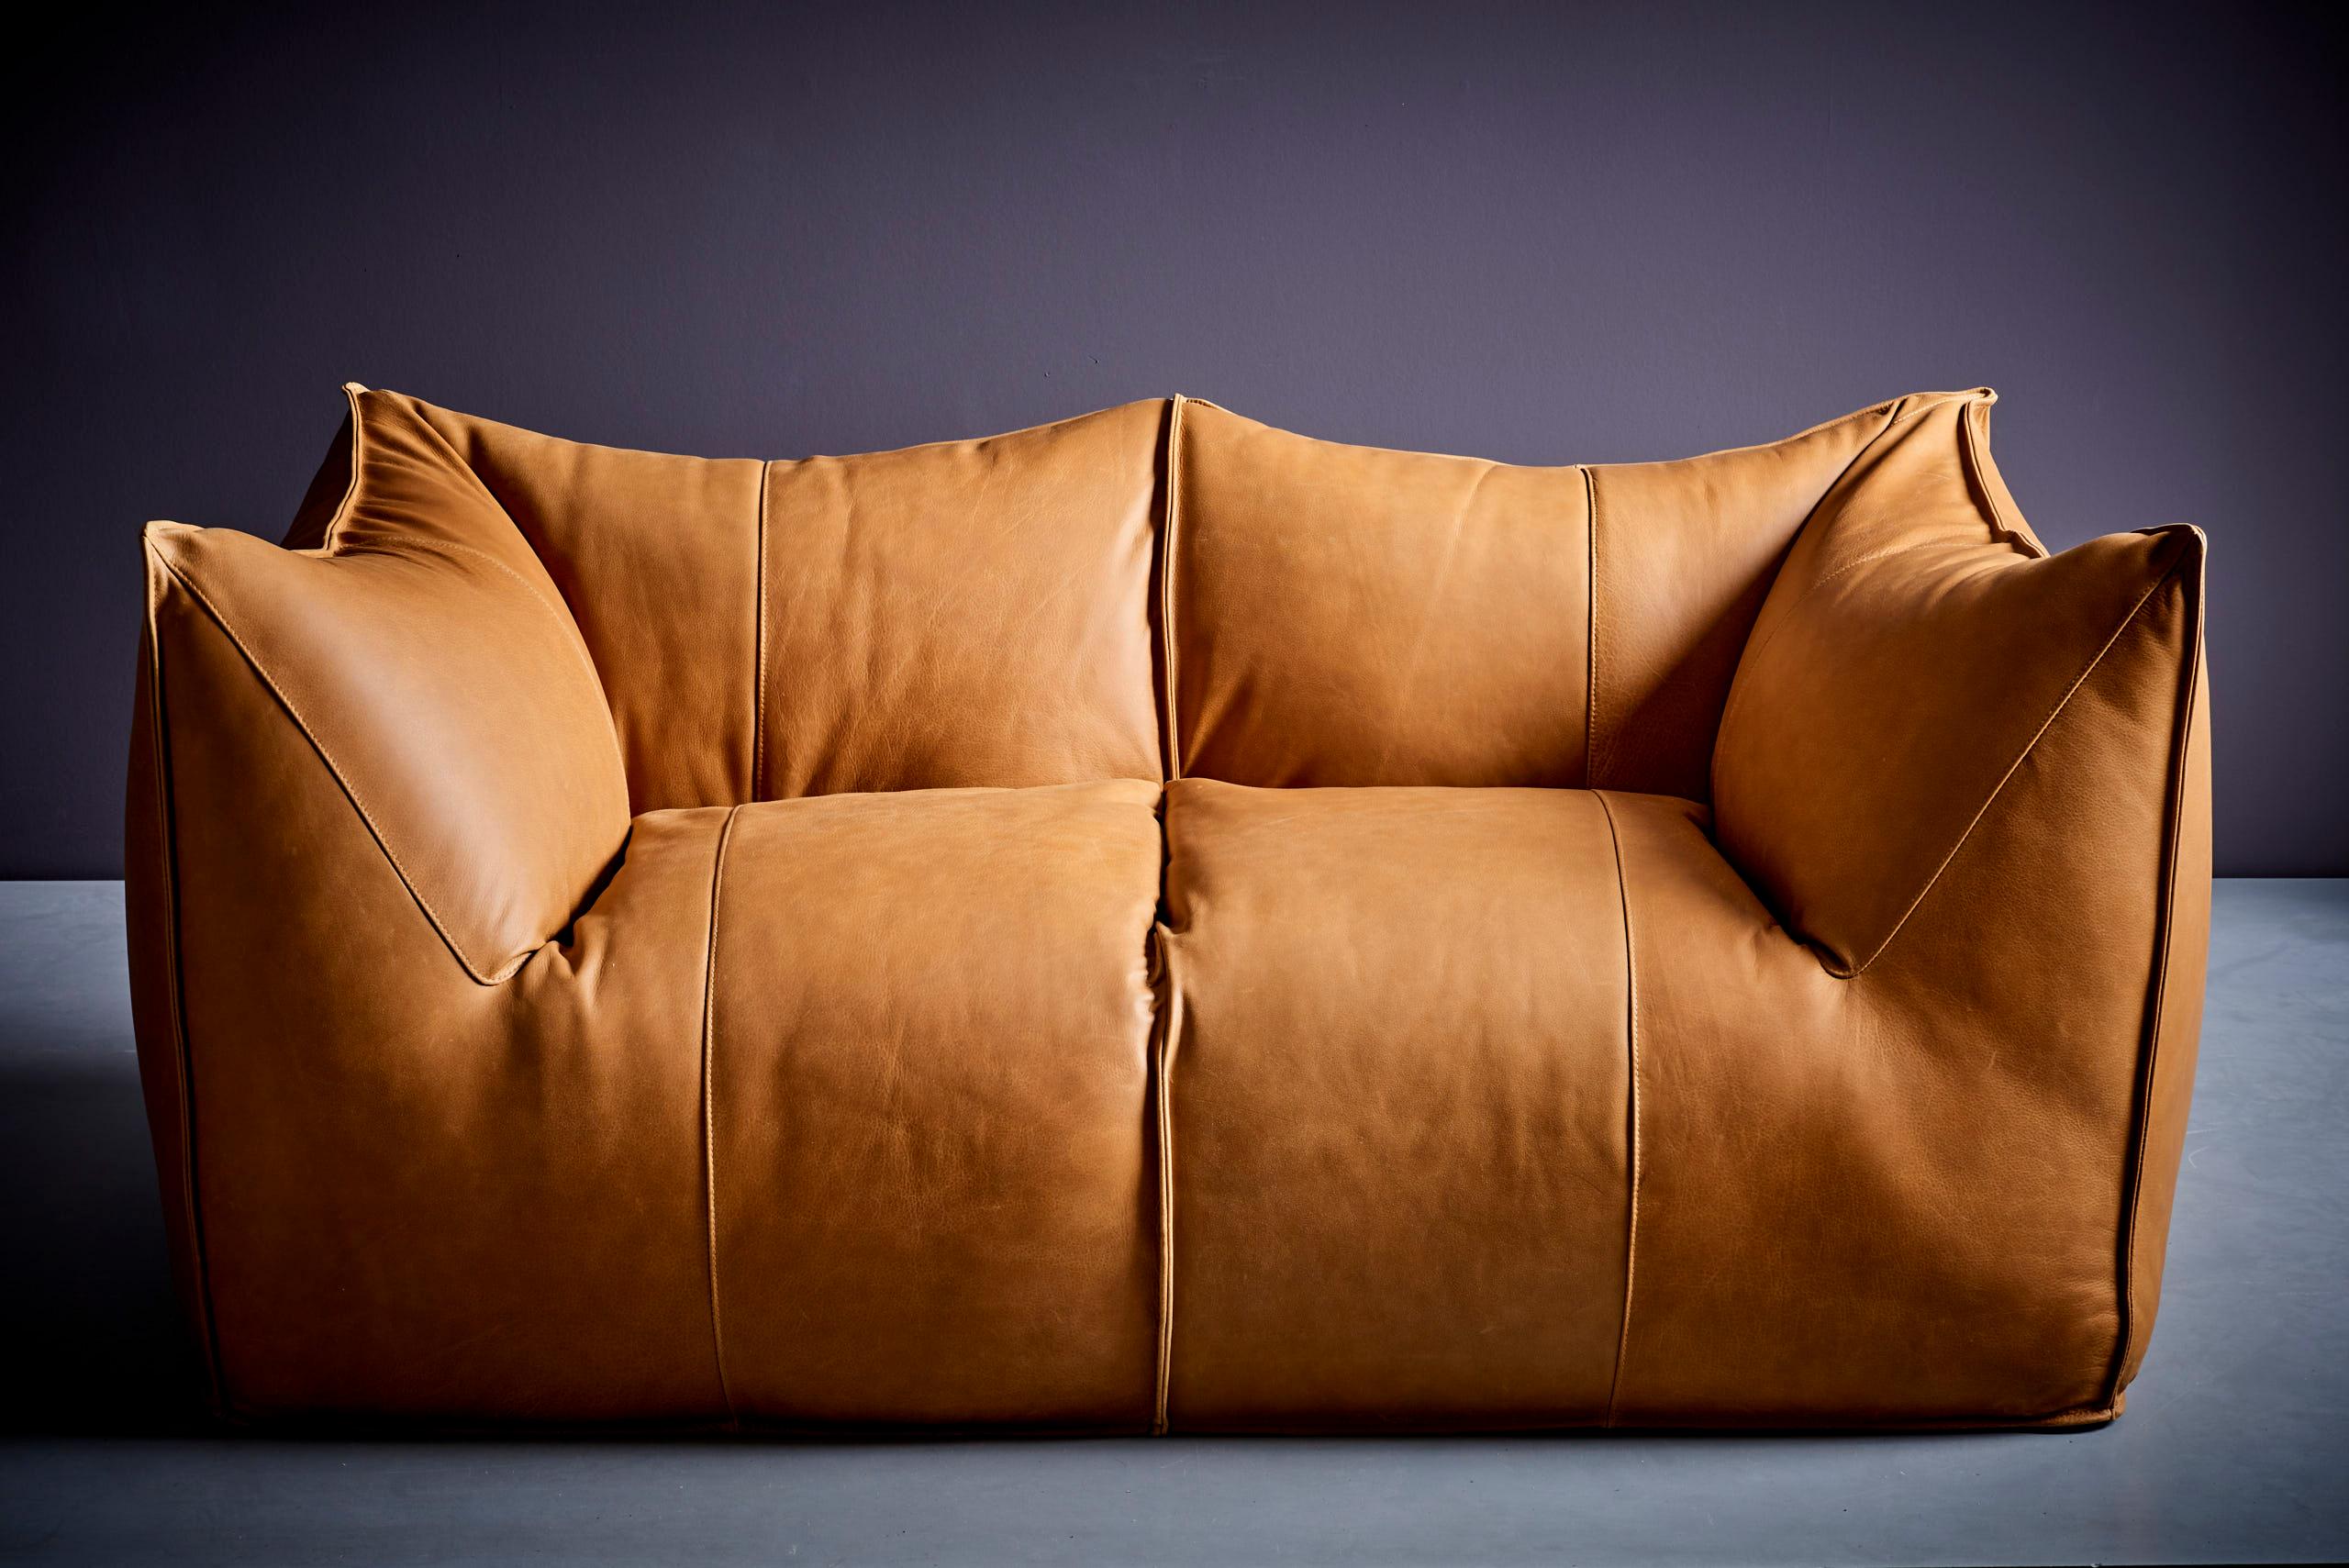 'Le Bambole' 2-seat sofa, designed in 1970s by Mario Bellini and manufactured by B&B Italia in Italy. Newly upholstered in brown leather.